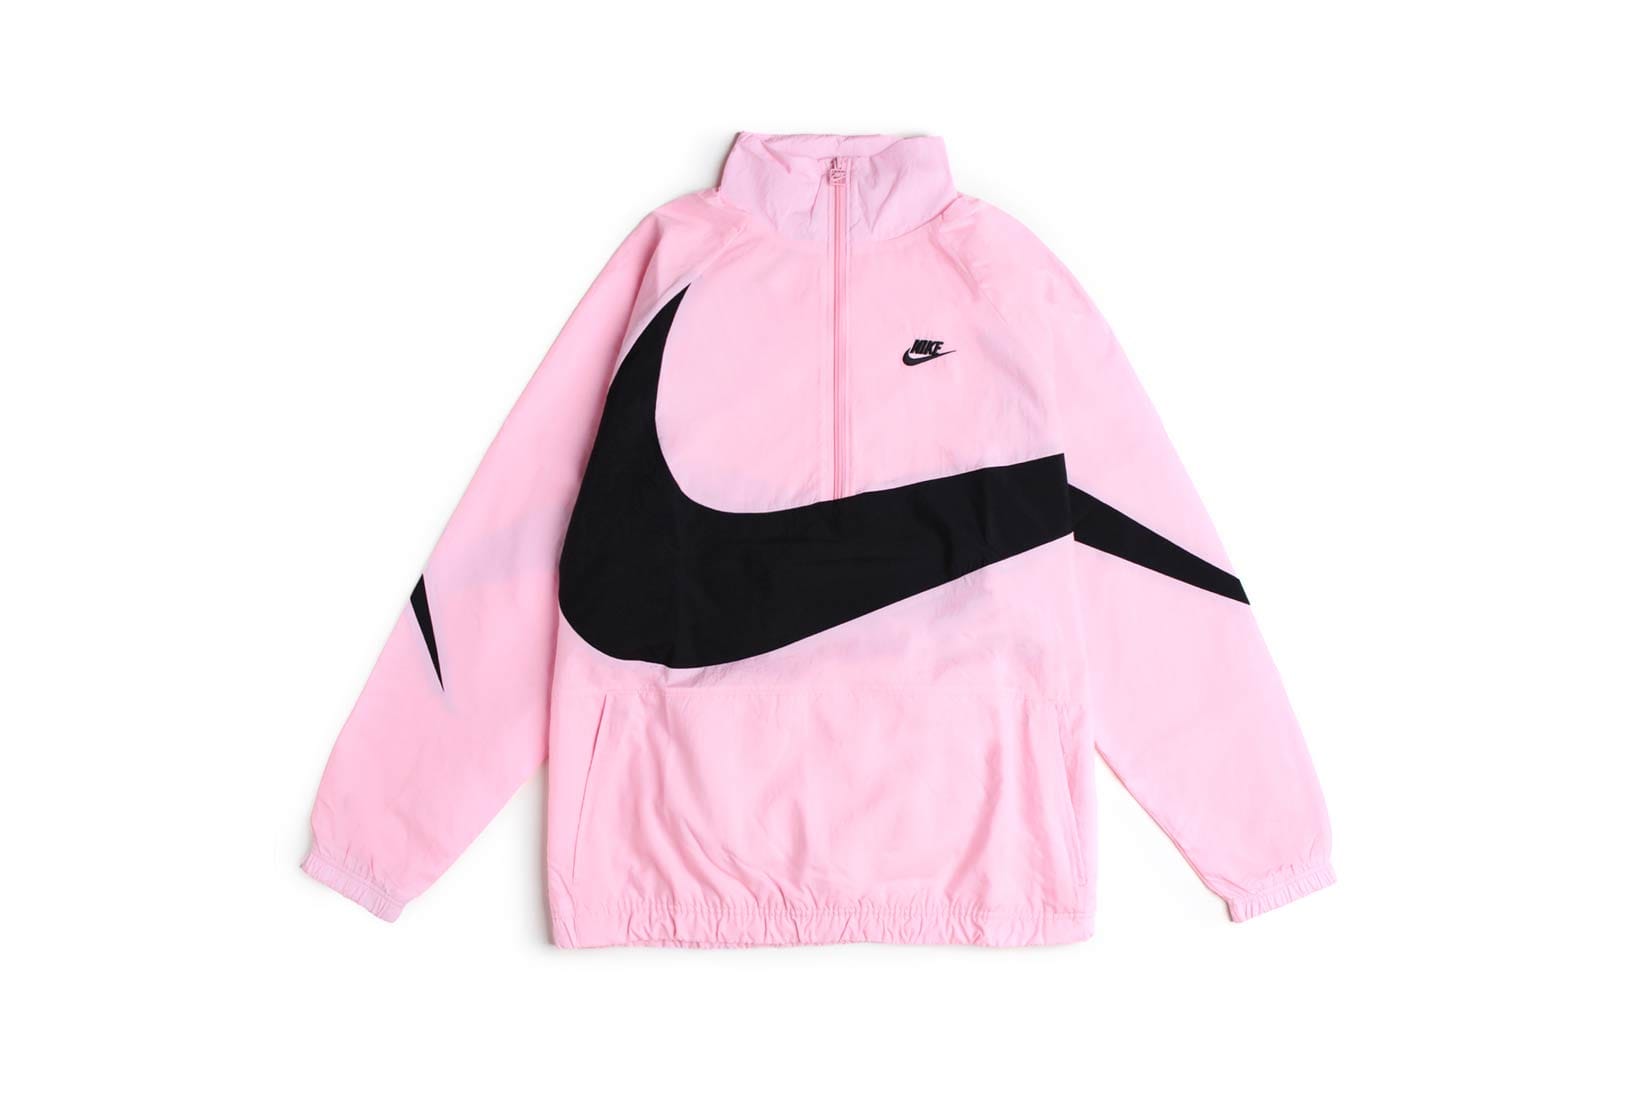 Shop Nike's Swoosh Jacket and Pants in Pink | Hypebae